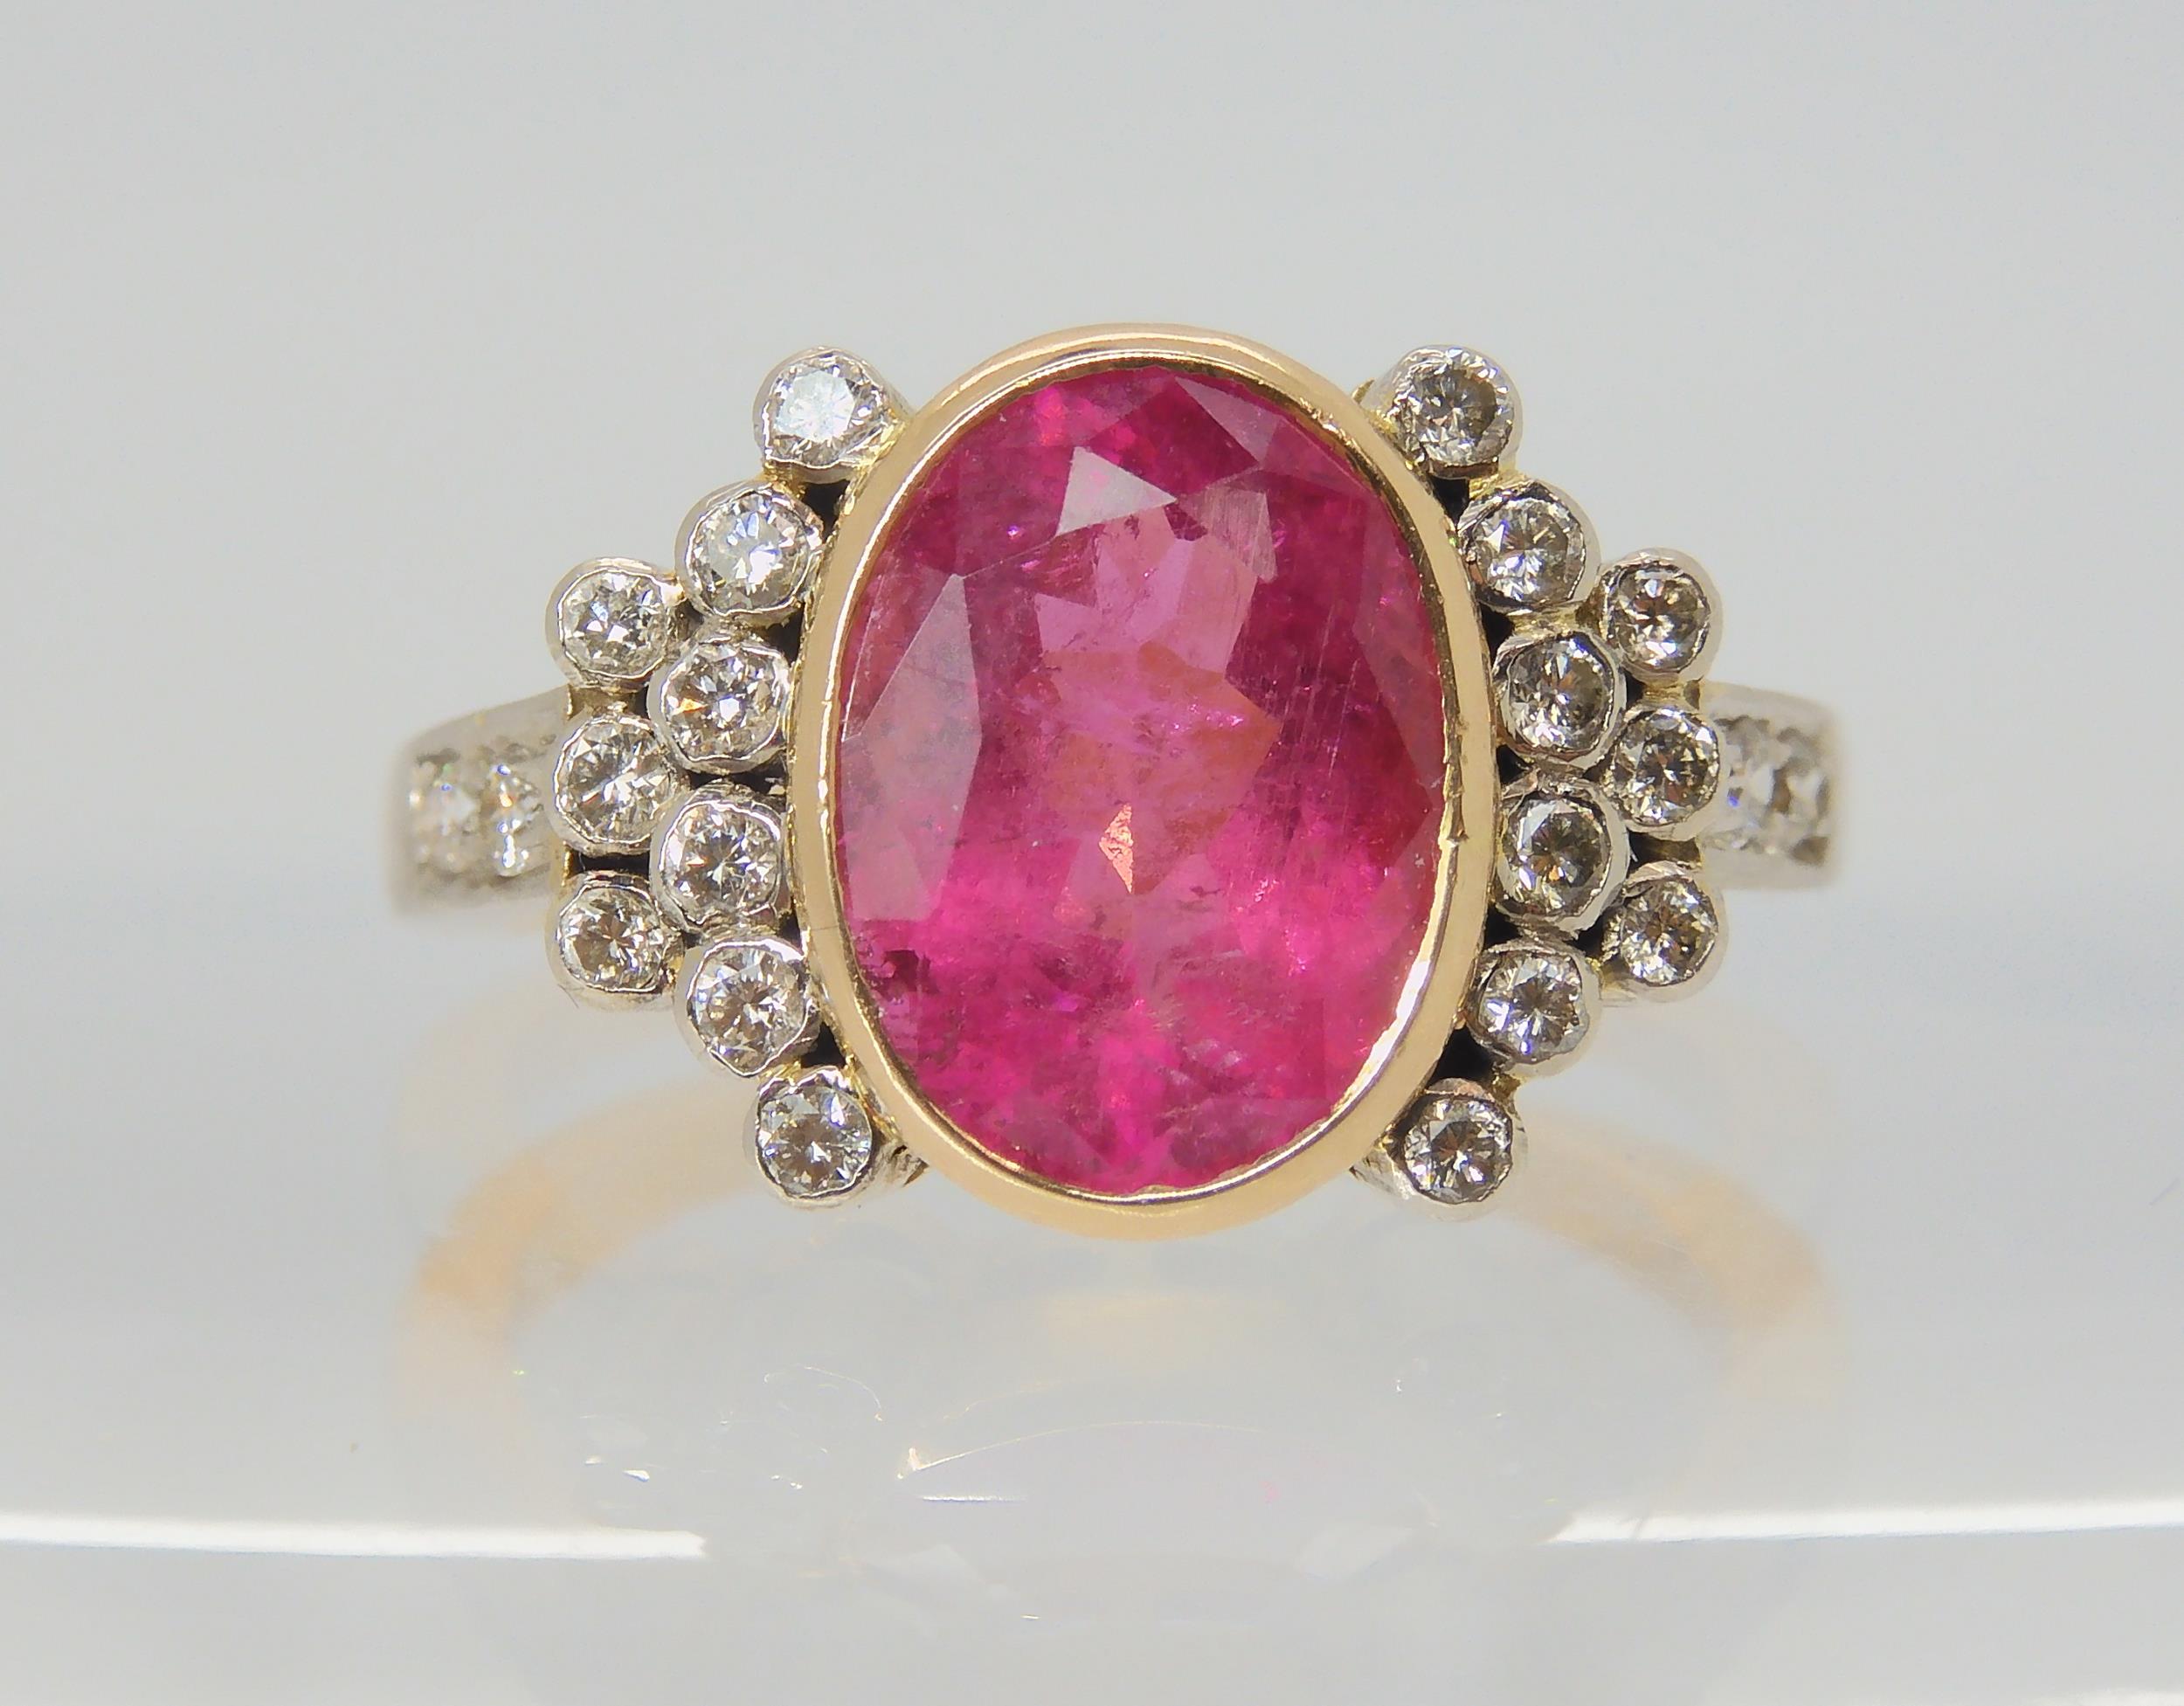 A PINK TOURMALINE AND DIAMOND RING the mount is stamped 750 for 18ct, and set with a 10.8mm x 8.